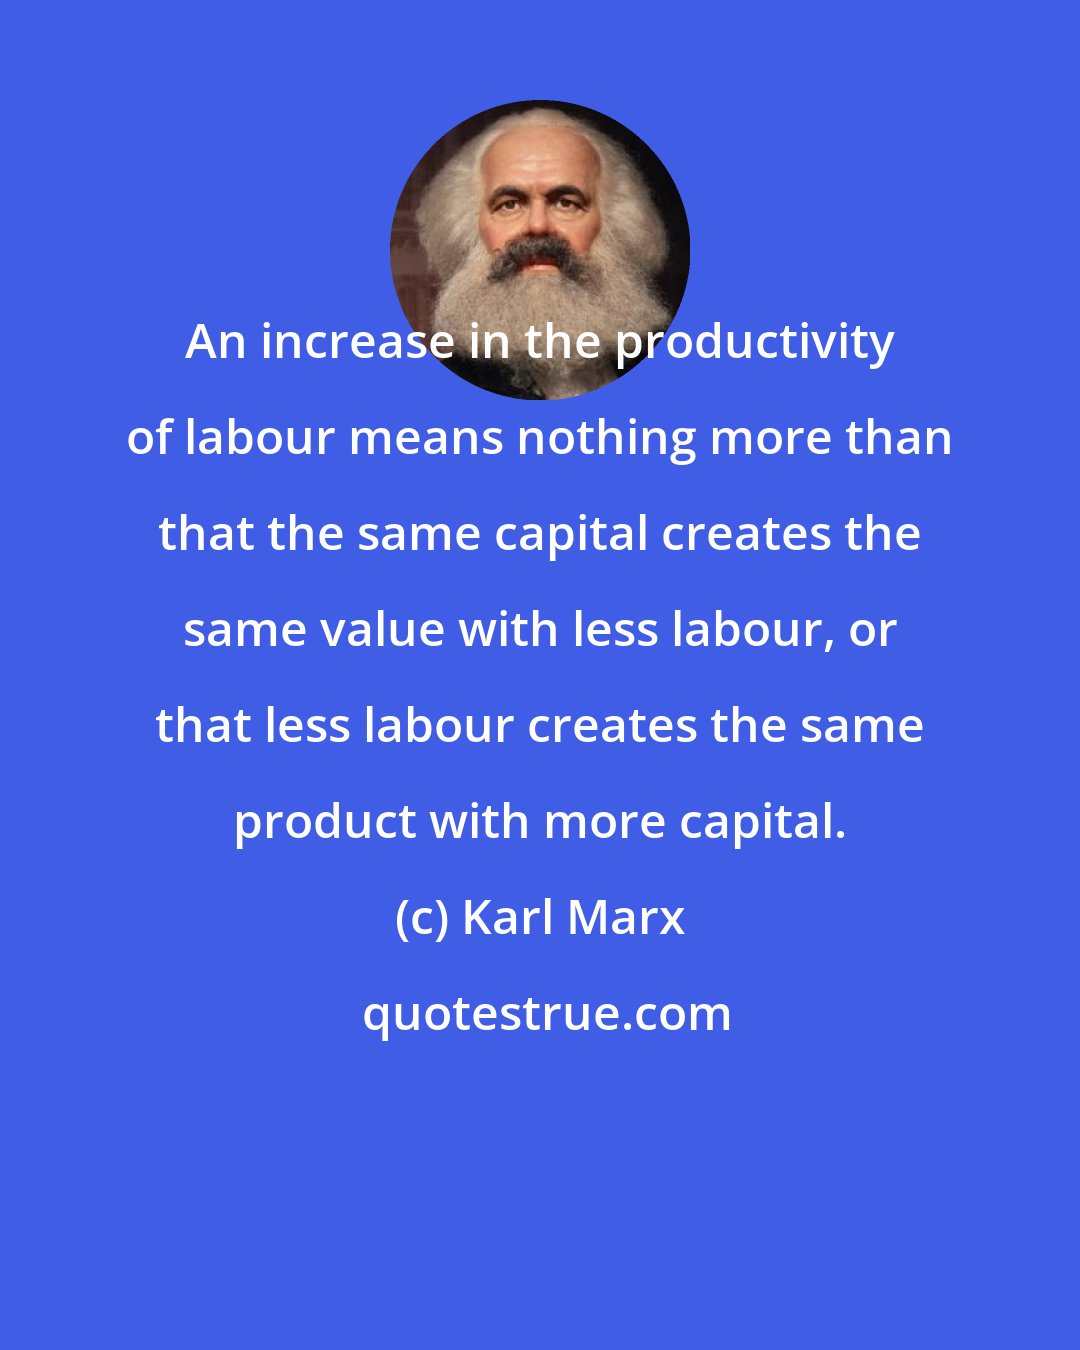 Karl Marx: An increase in the productivity of labour means nothing more than that the same capital creates the same value with less labour, or that less labour creates the same product with more capital.